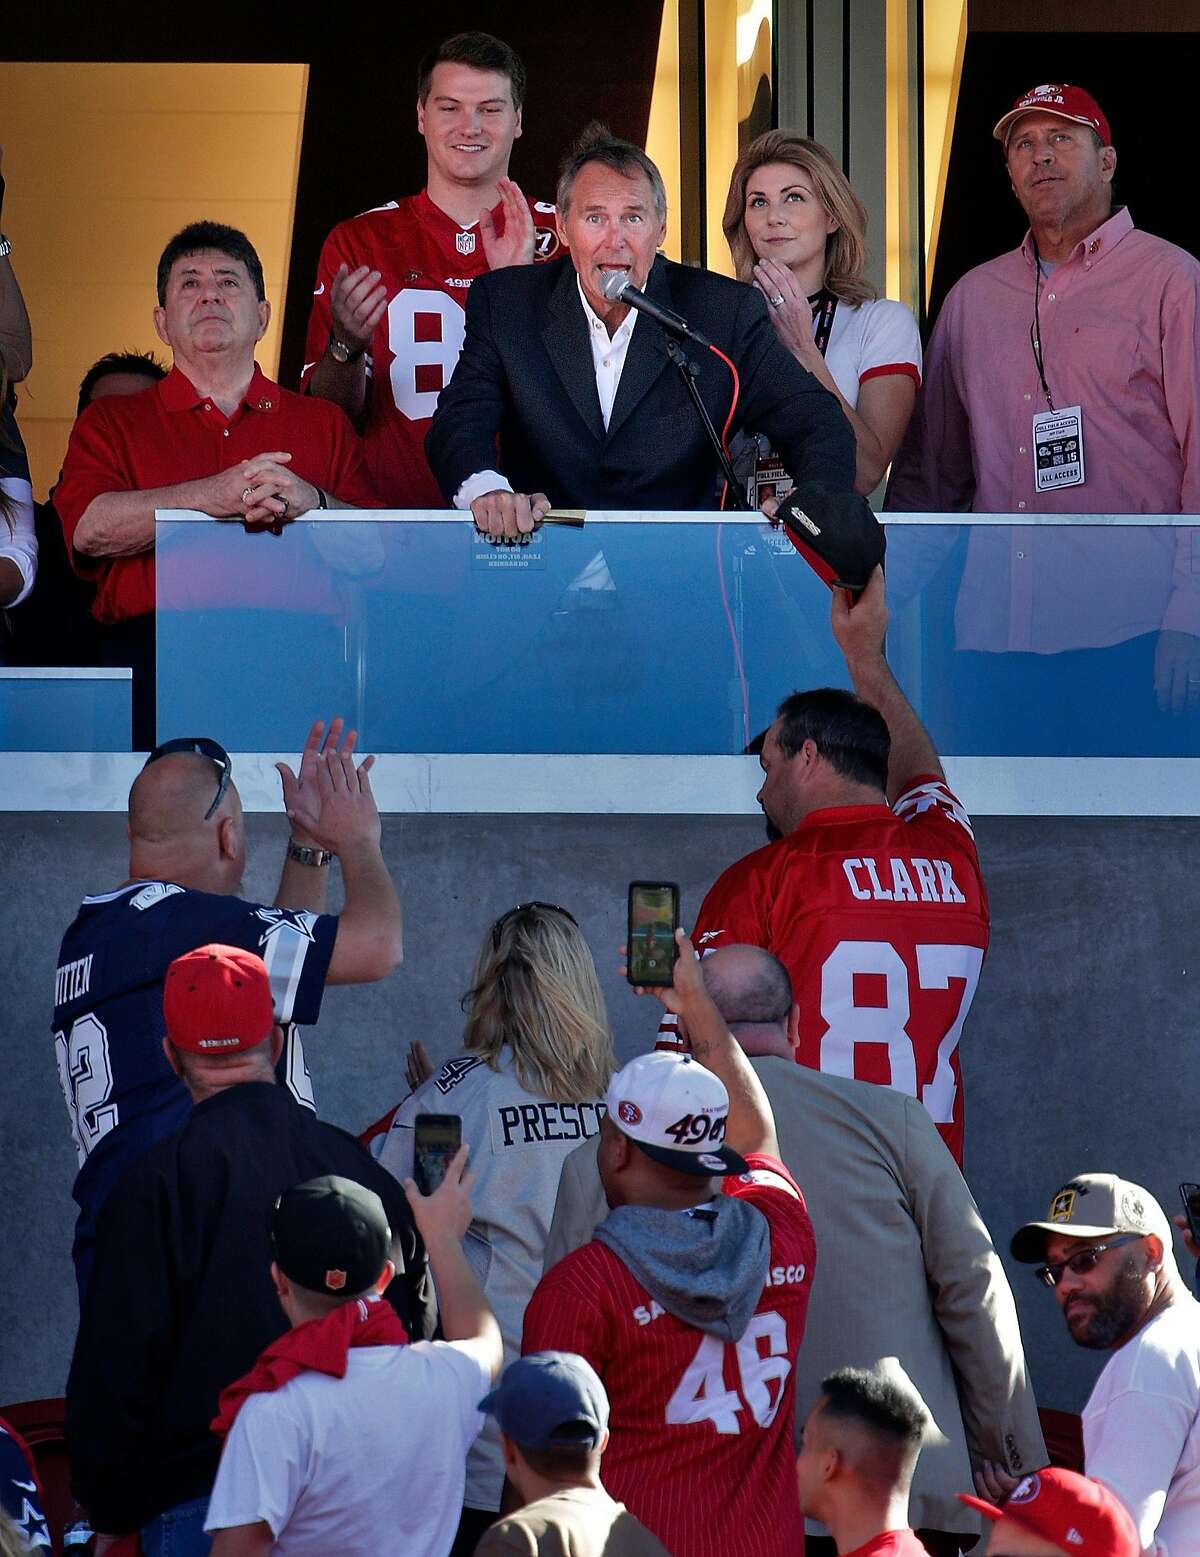 Dwight Clark speaks to the crowd during a halftime ceremony honoring Clark who recently announced he is battling ALS, as the San Francisco 49ers payed the Dallas Cowboys at Levi's Stadium in Santa Clara, Calif., Sunday, October 22, 2017.